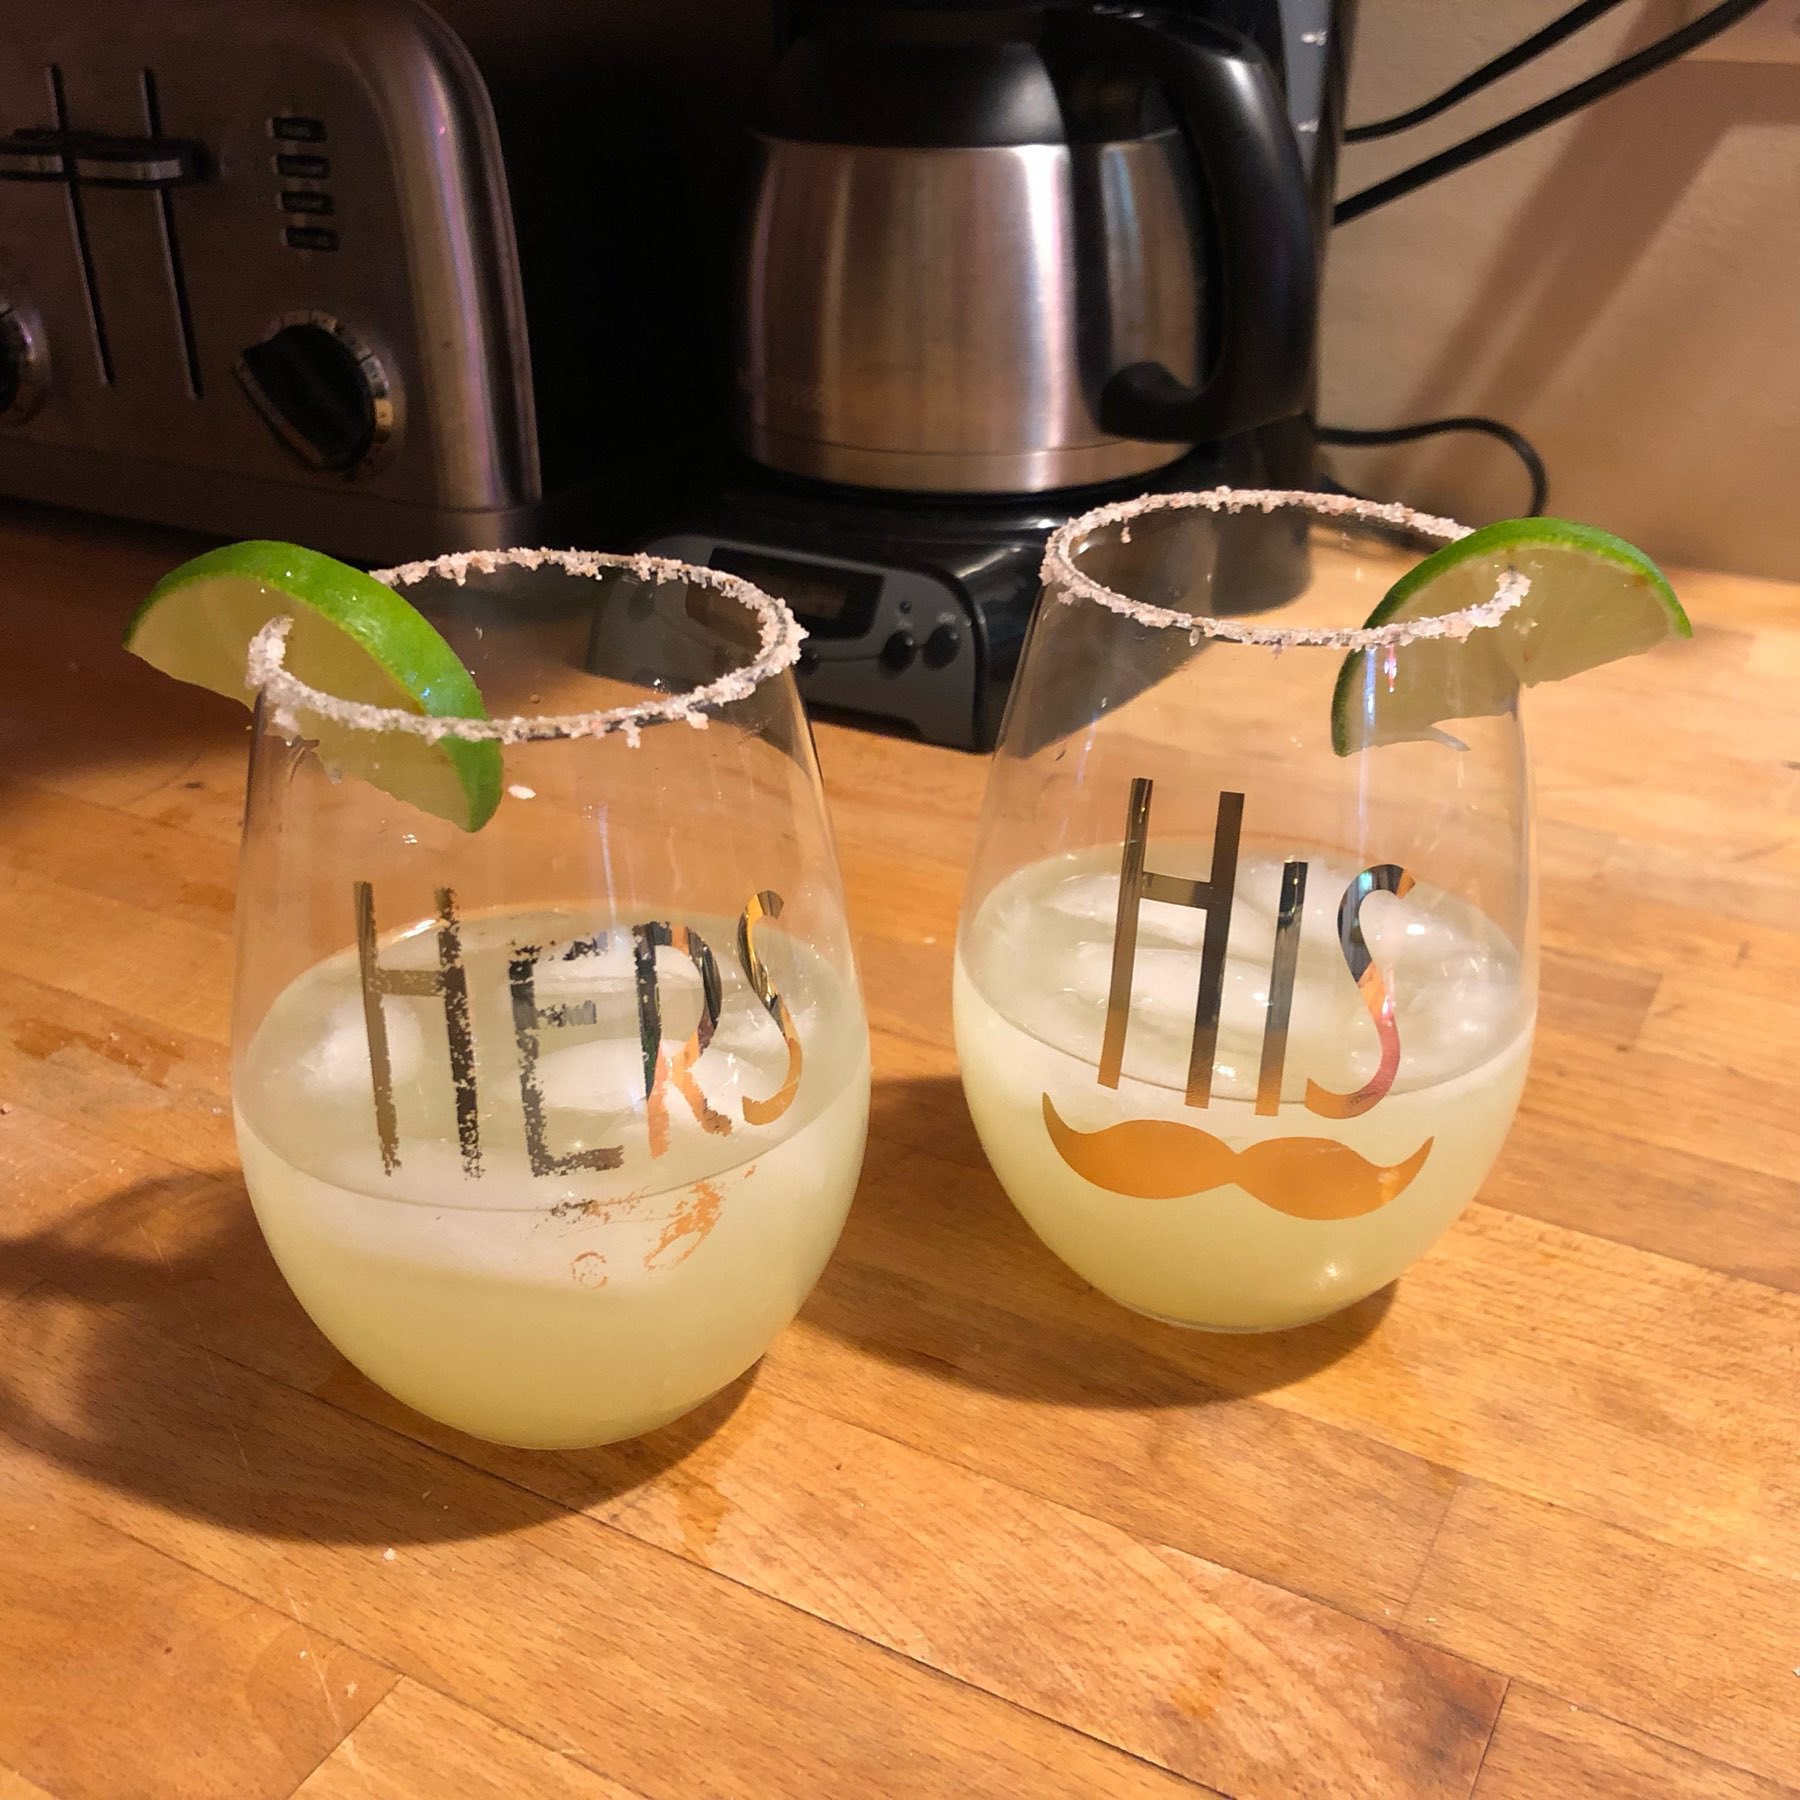 Stemless wine glasses, embossed with gold "His" and "Hers" decals, partly filled with ice and margarita cocktails.